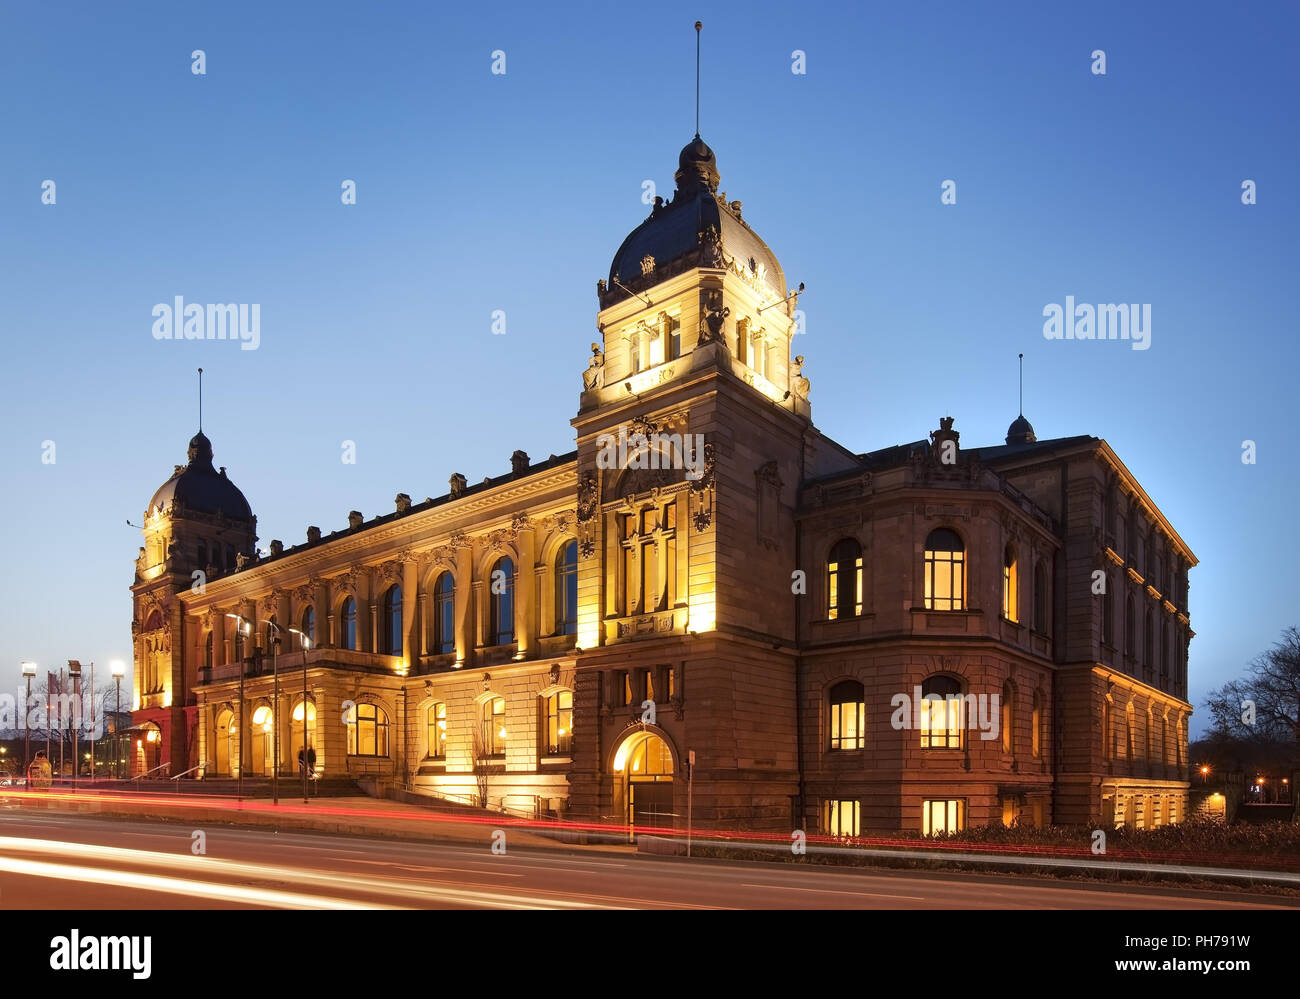 historic town hall in the evening, Wuppertal, Bergisches Land, North Rhine-Westphalia, Germany Stock Photo